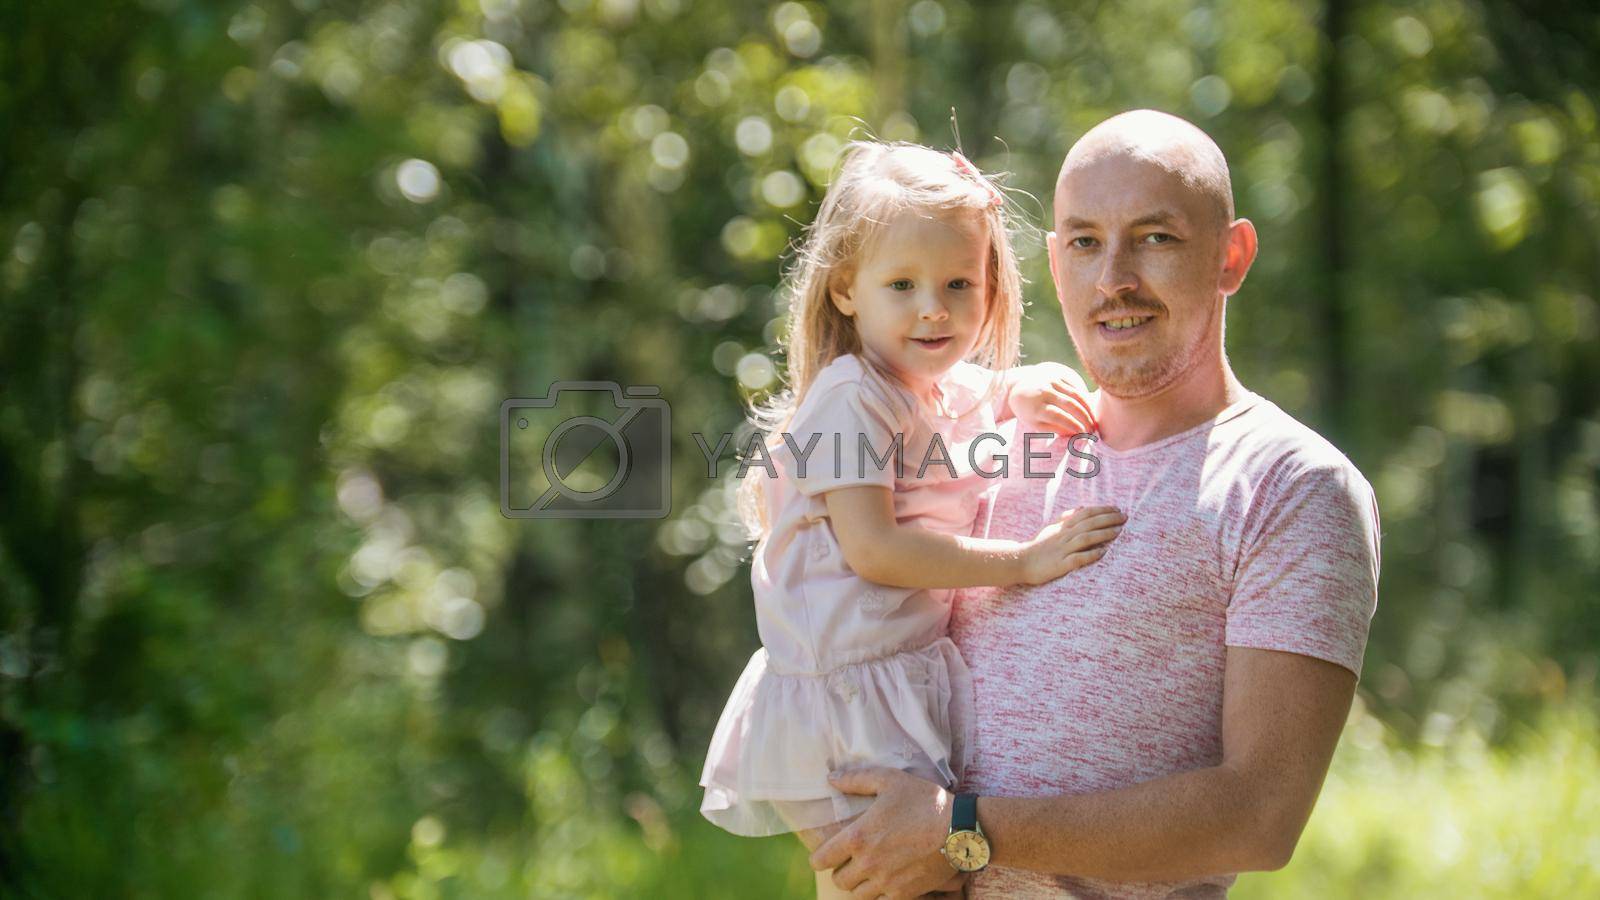 Happy family - father with daughter in summer park, telephoto view